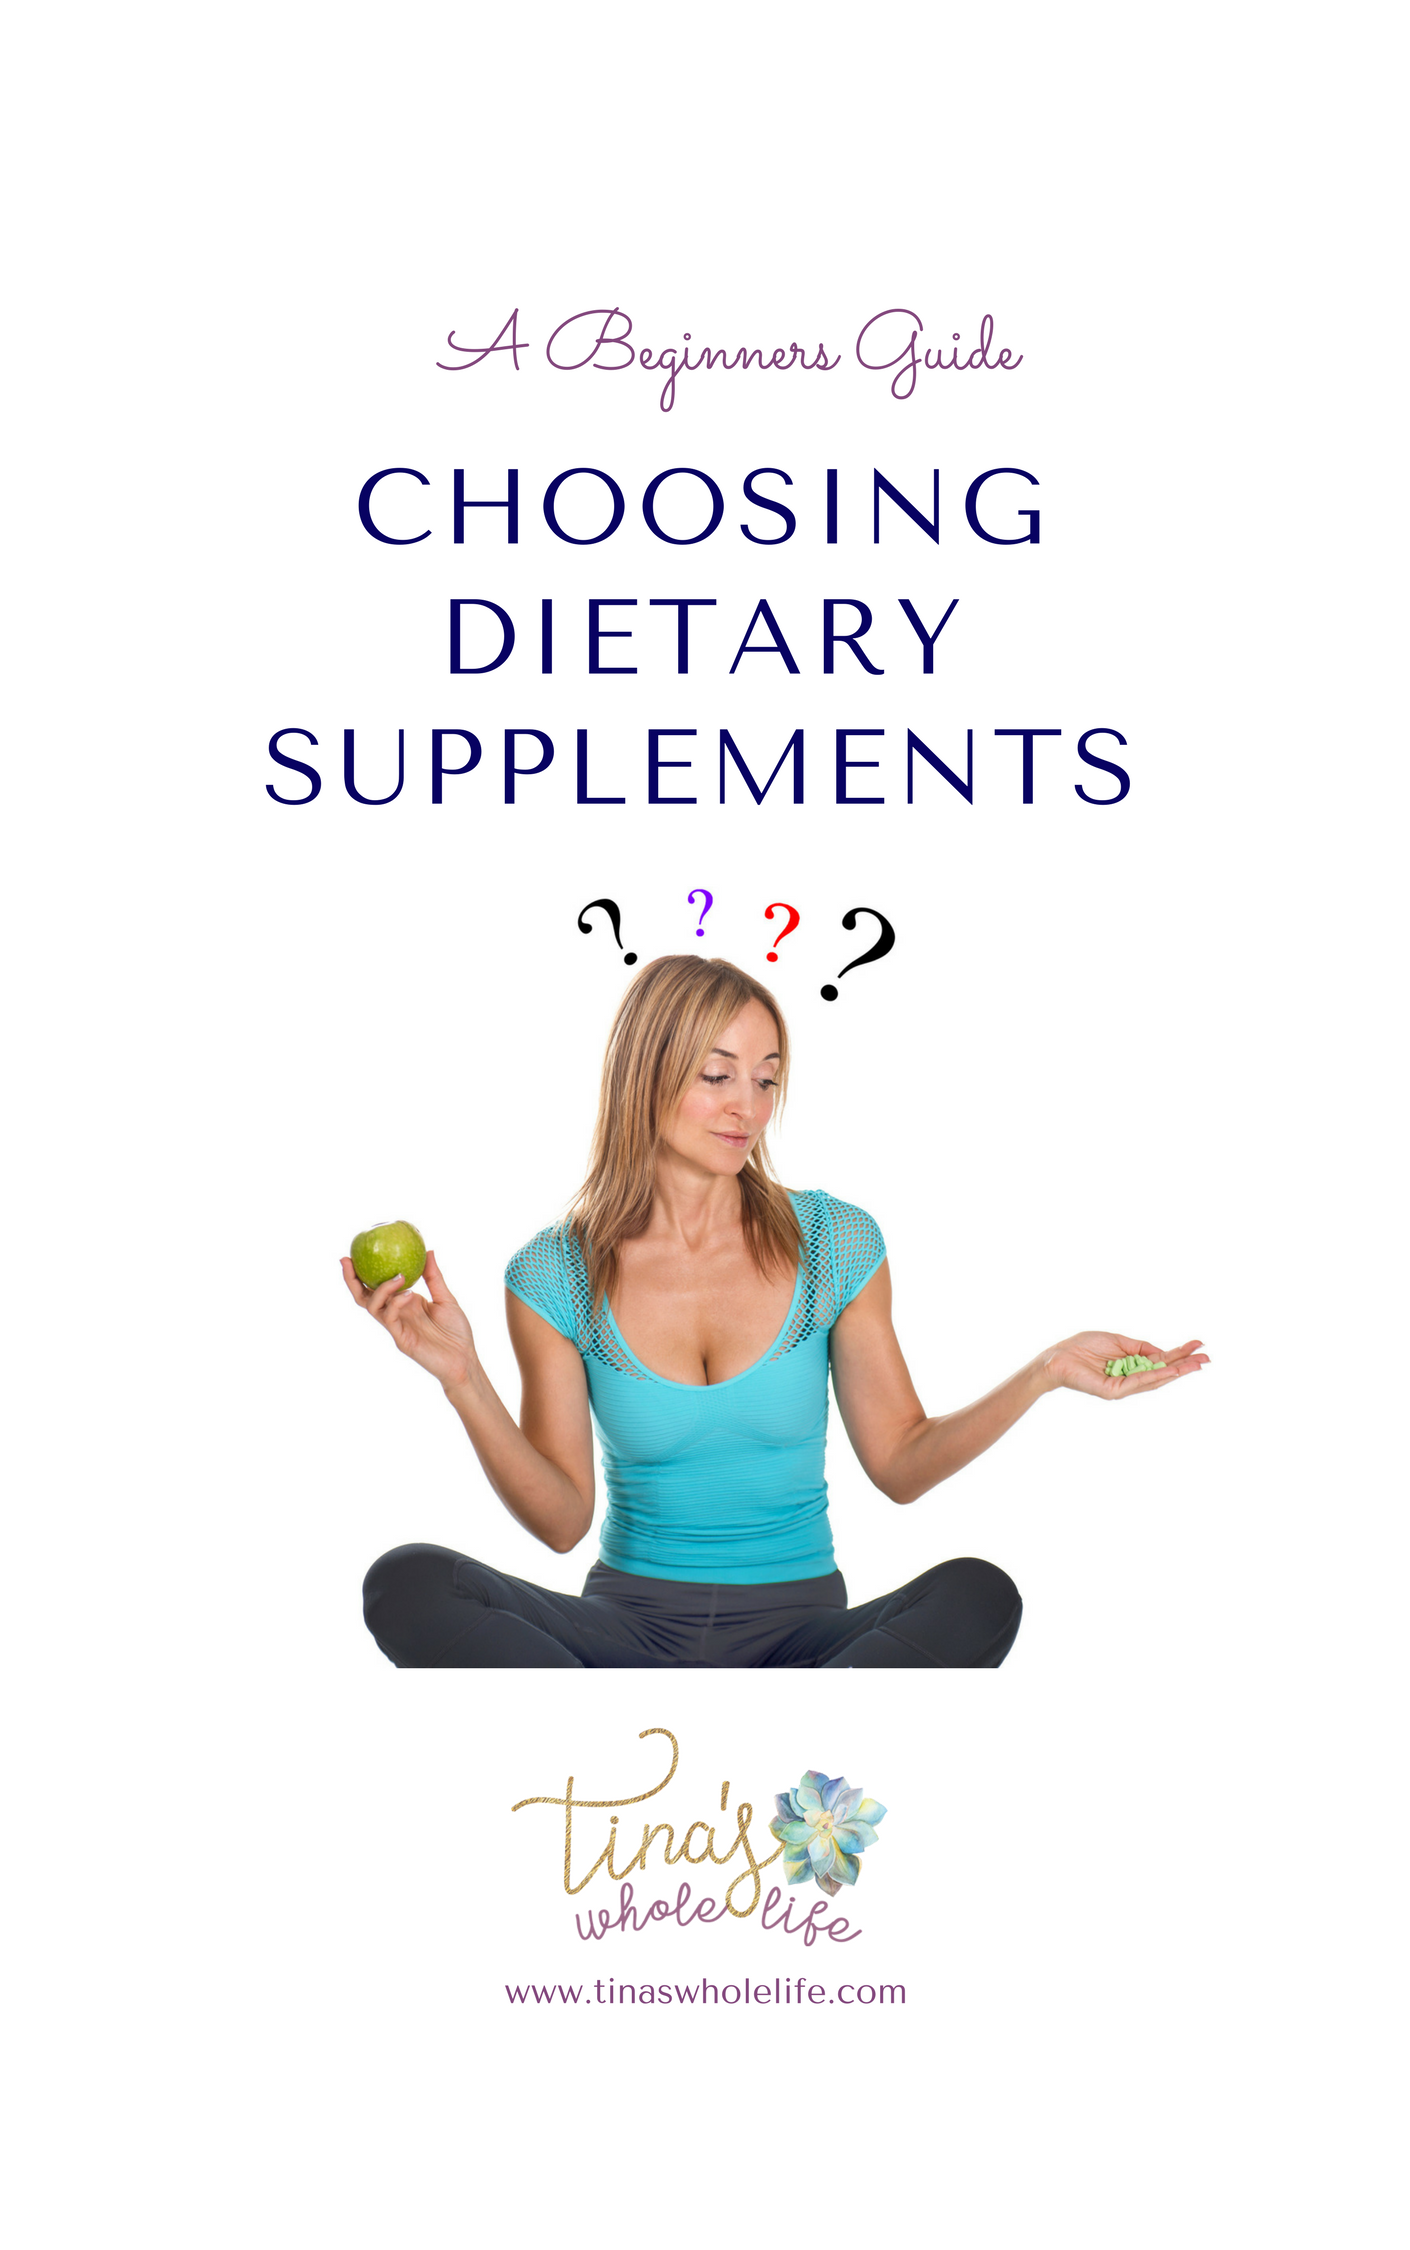 A Beginners Guide - Choosing Dietary Supplements cover.png